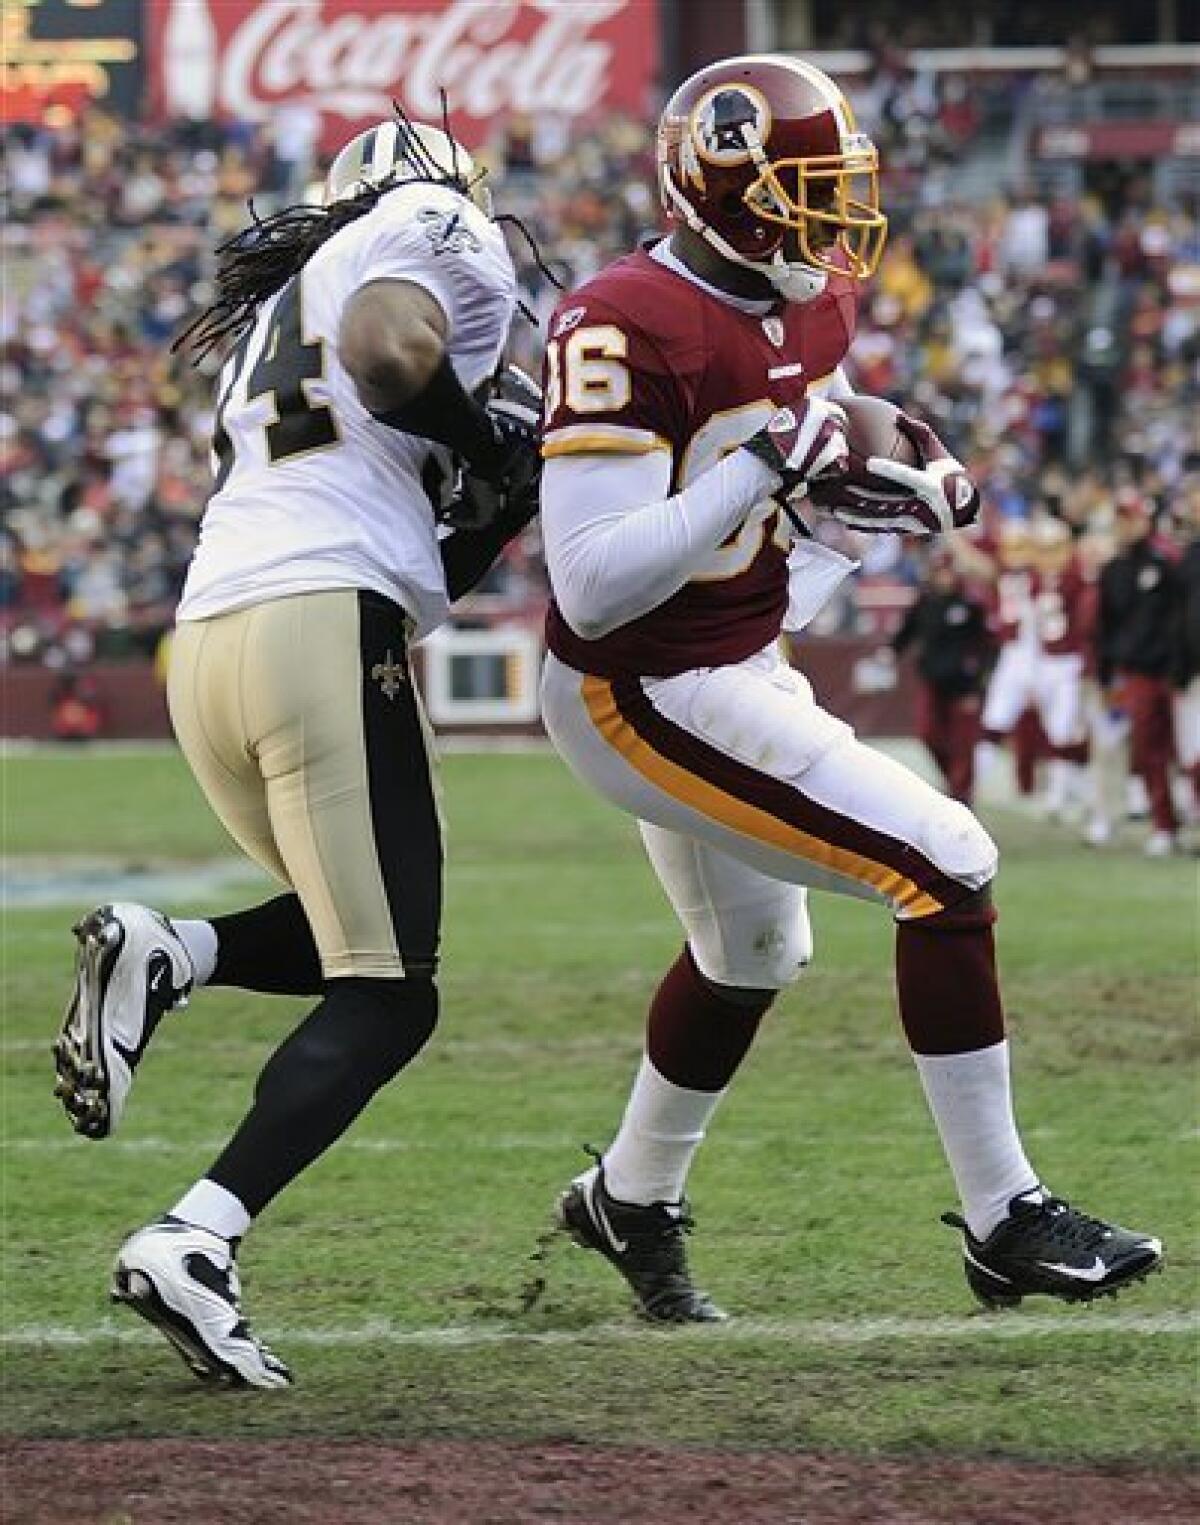 Saints live charmed life, top Redskins 33-30 in OT - The San Diego